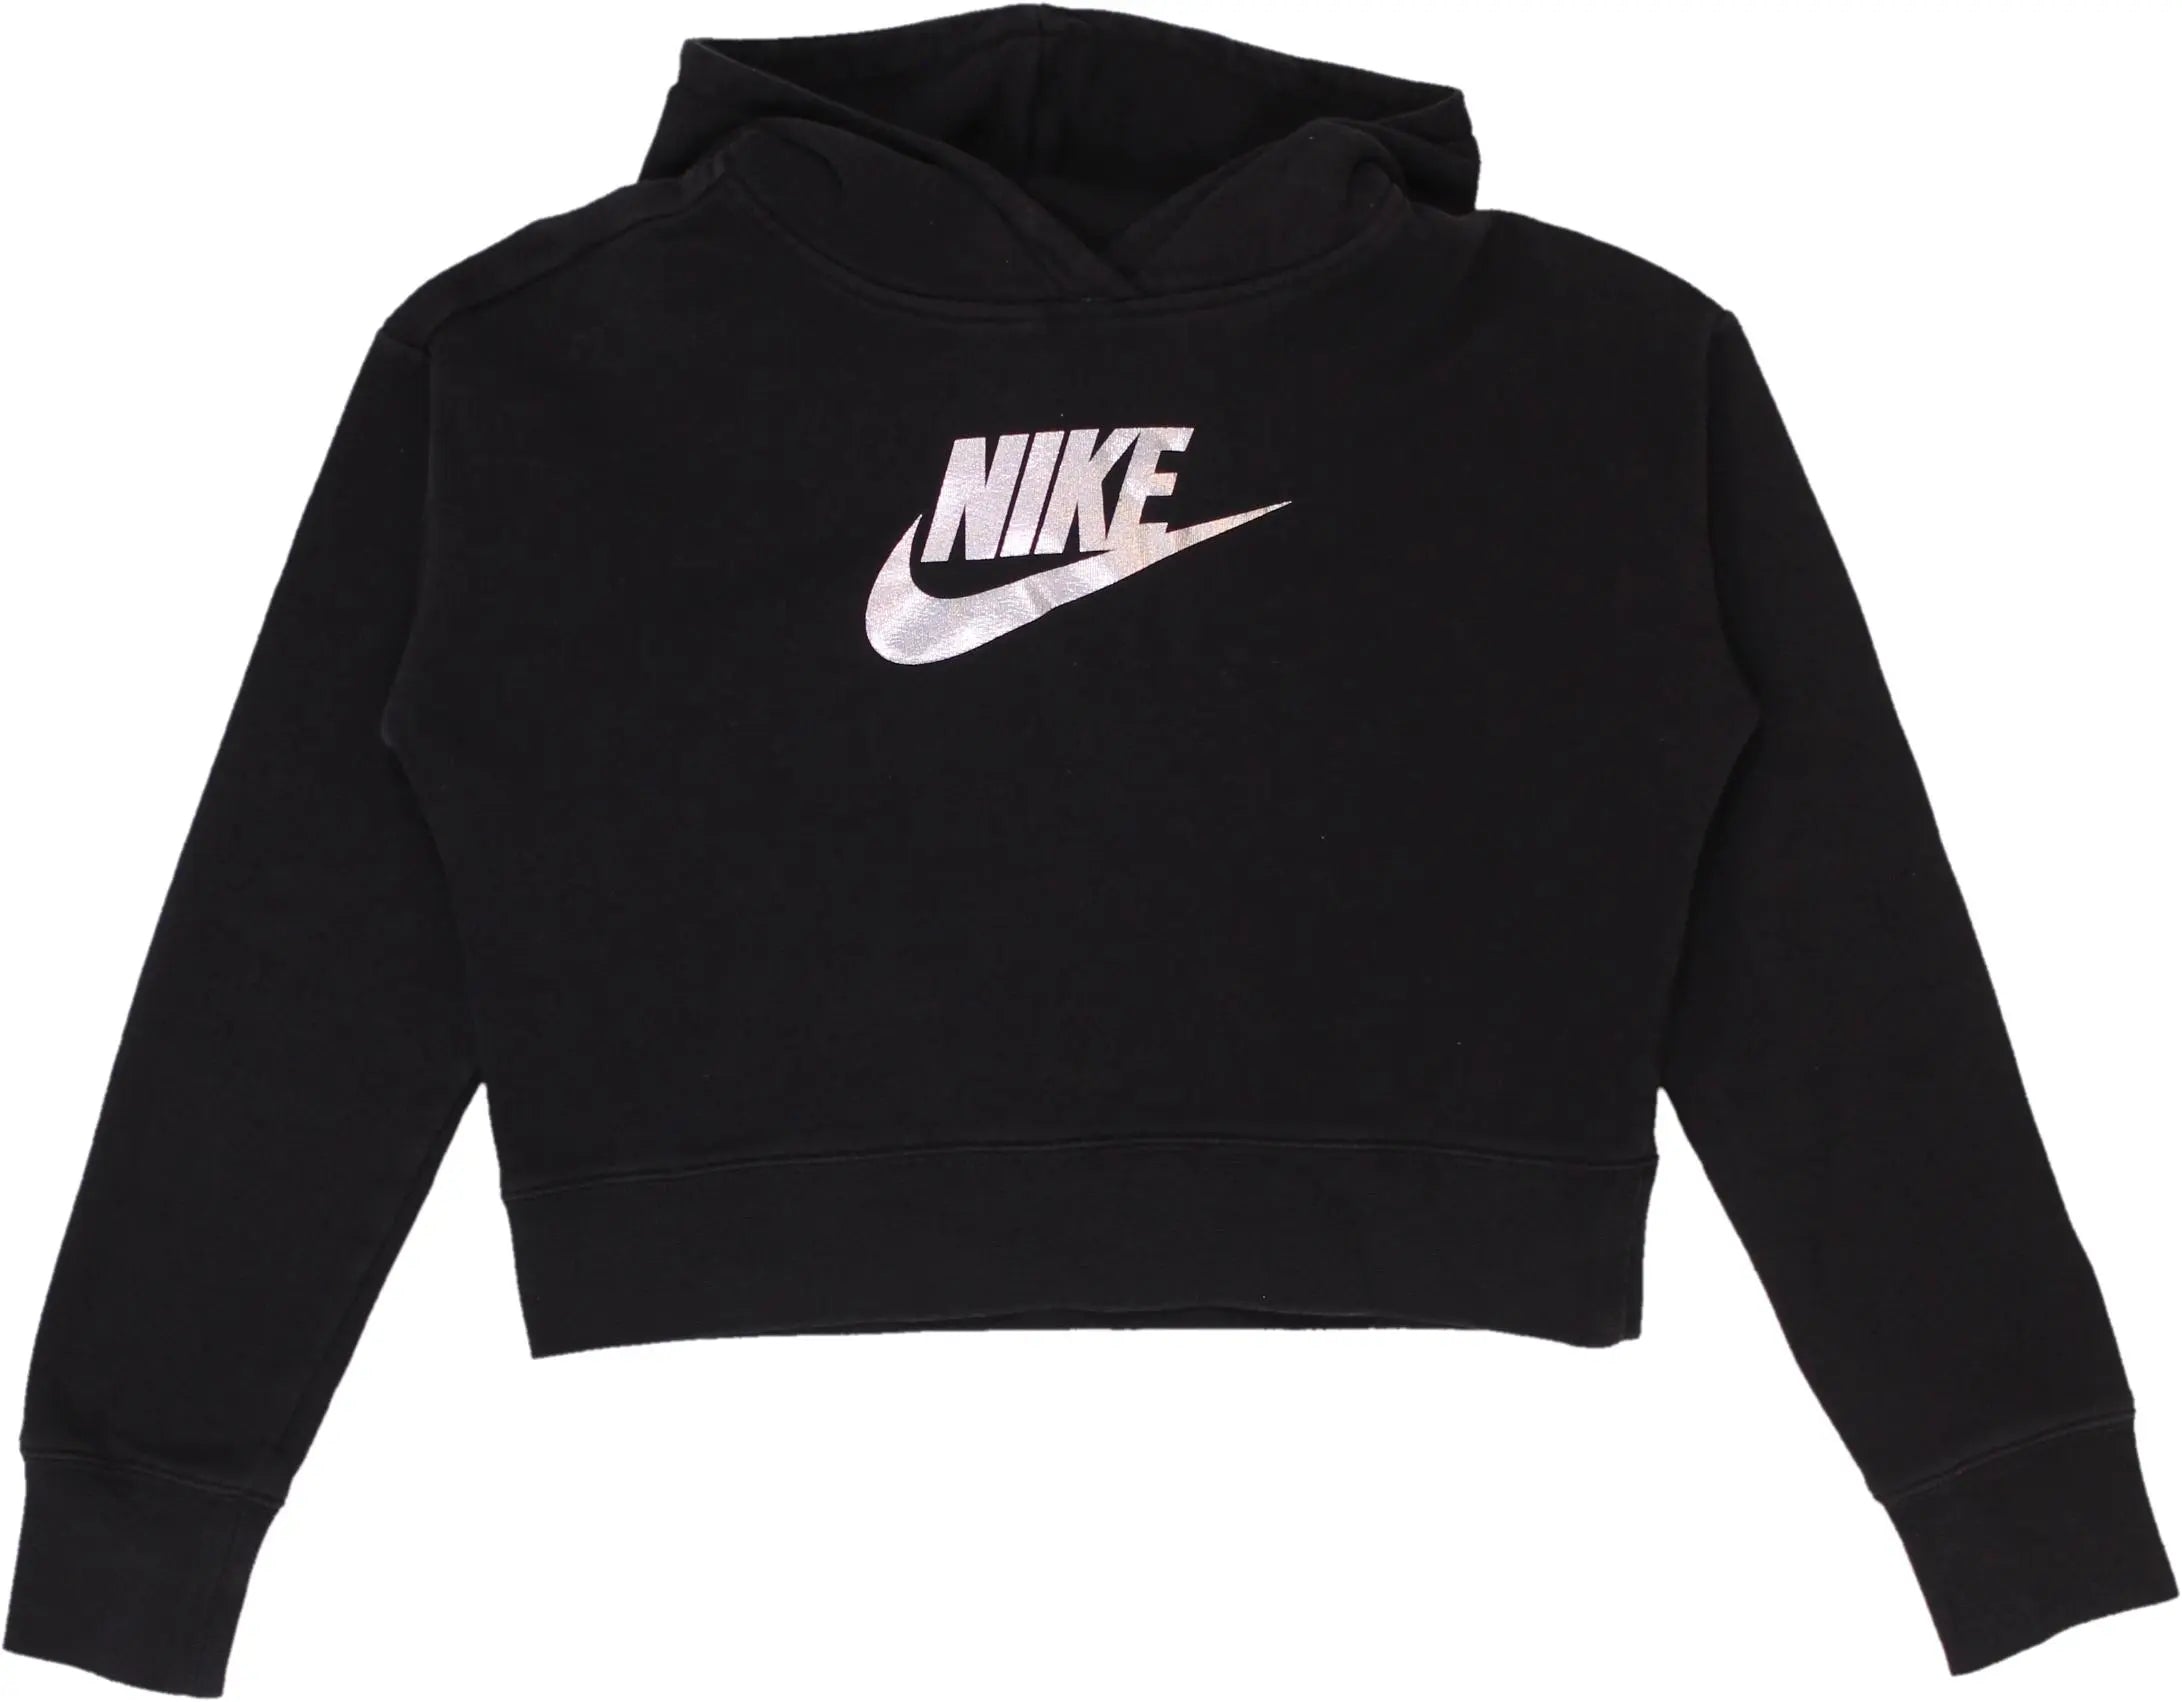 Nike - Black Cropped Hoodie by Nike- ThriftTale.com - Vintage and second handclothing